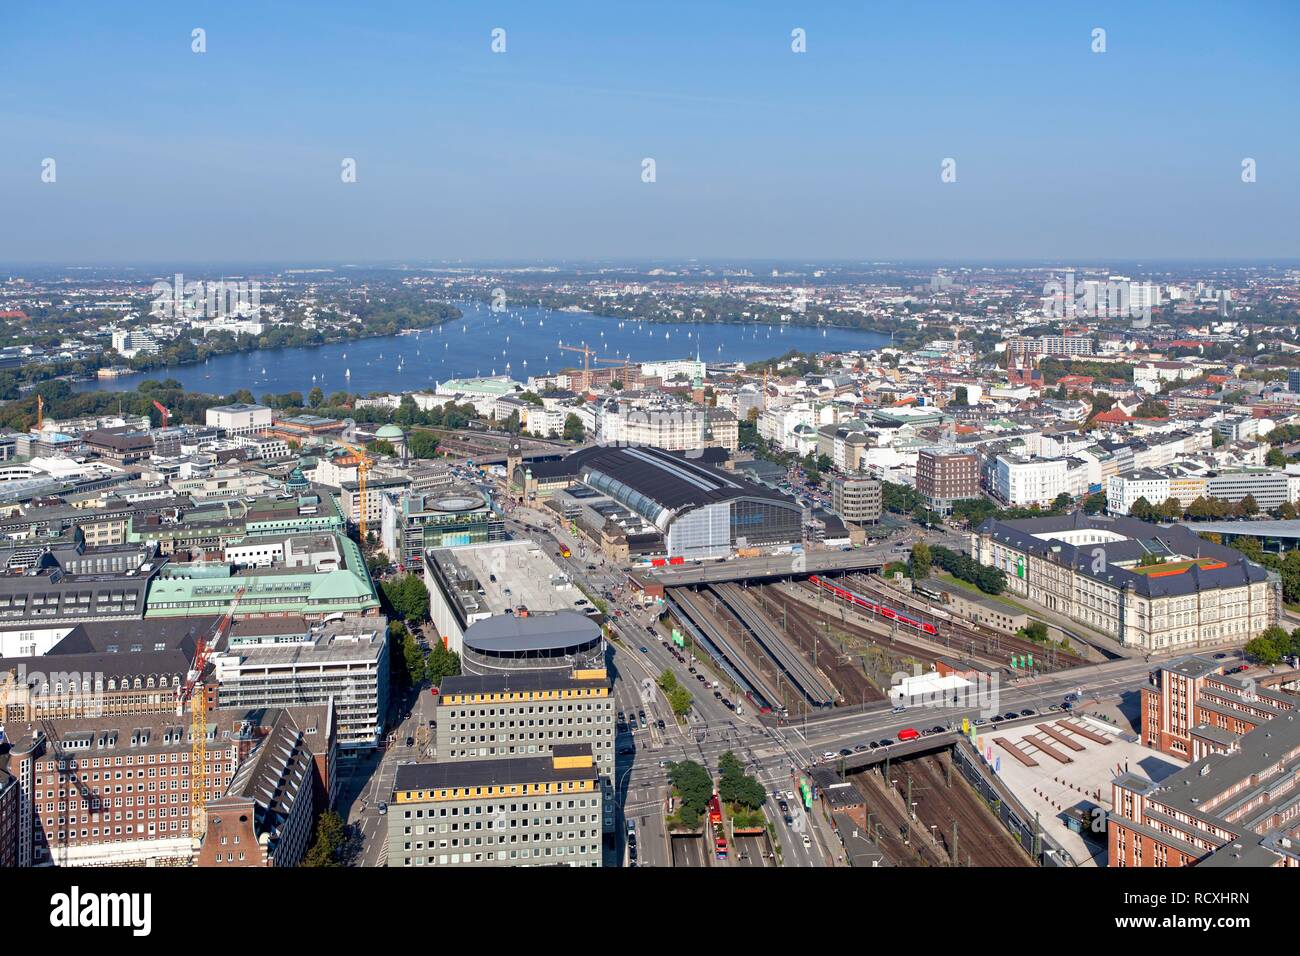 View from Highflyer, captive balloon, overlooking Aussenalster or Outer Alster Lake and main train station, Hamburg Stock Photo